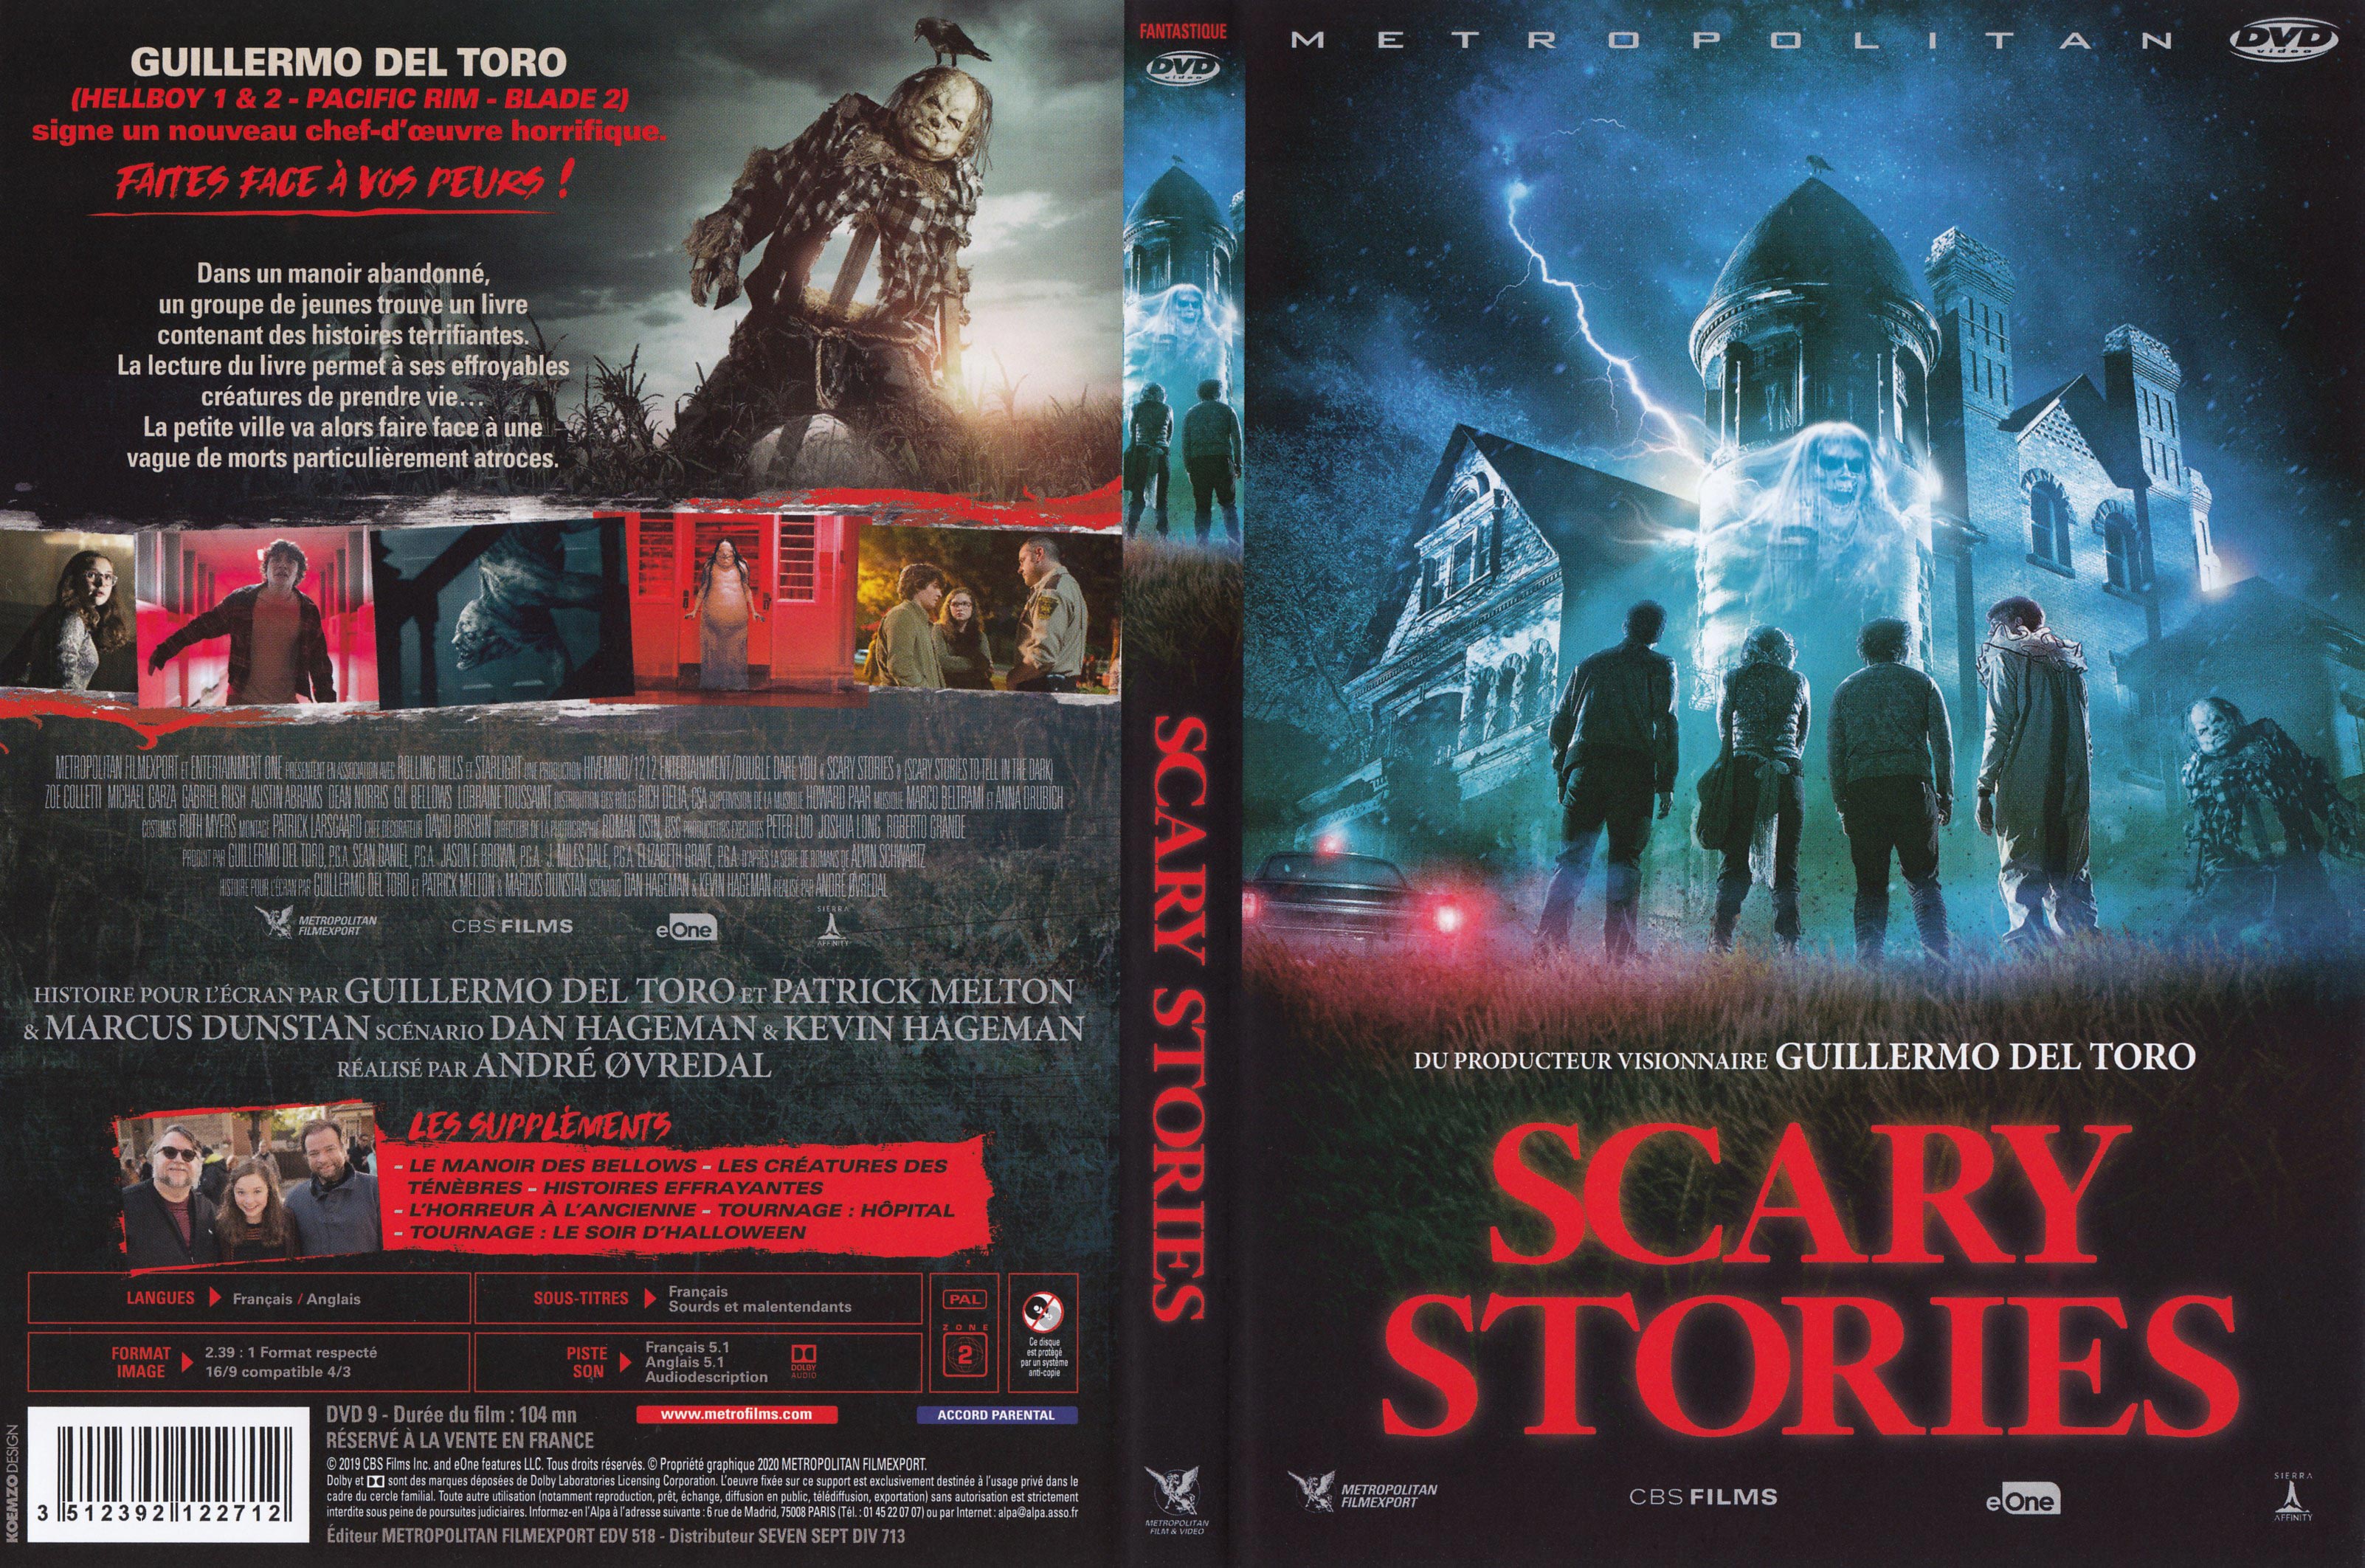 Jaquette DVD Scary stories